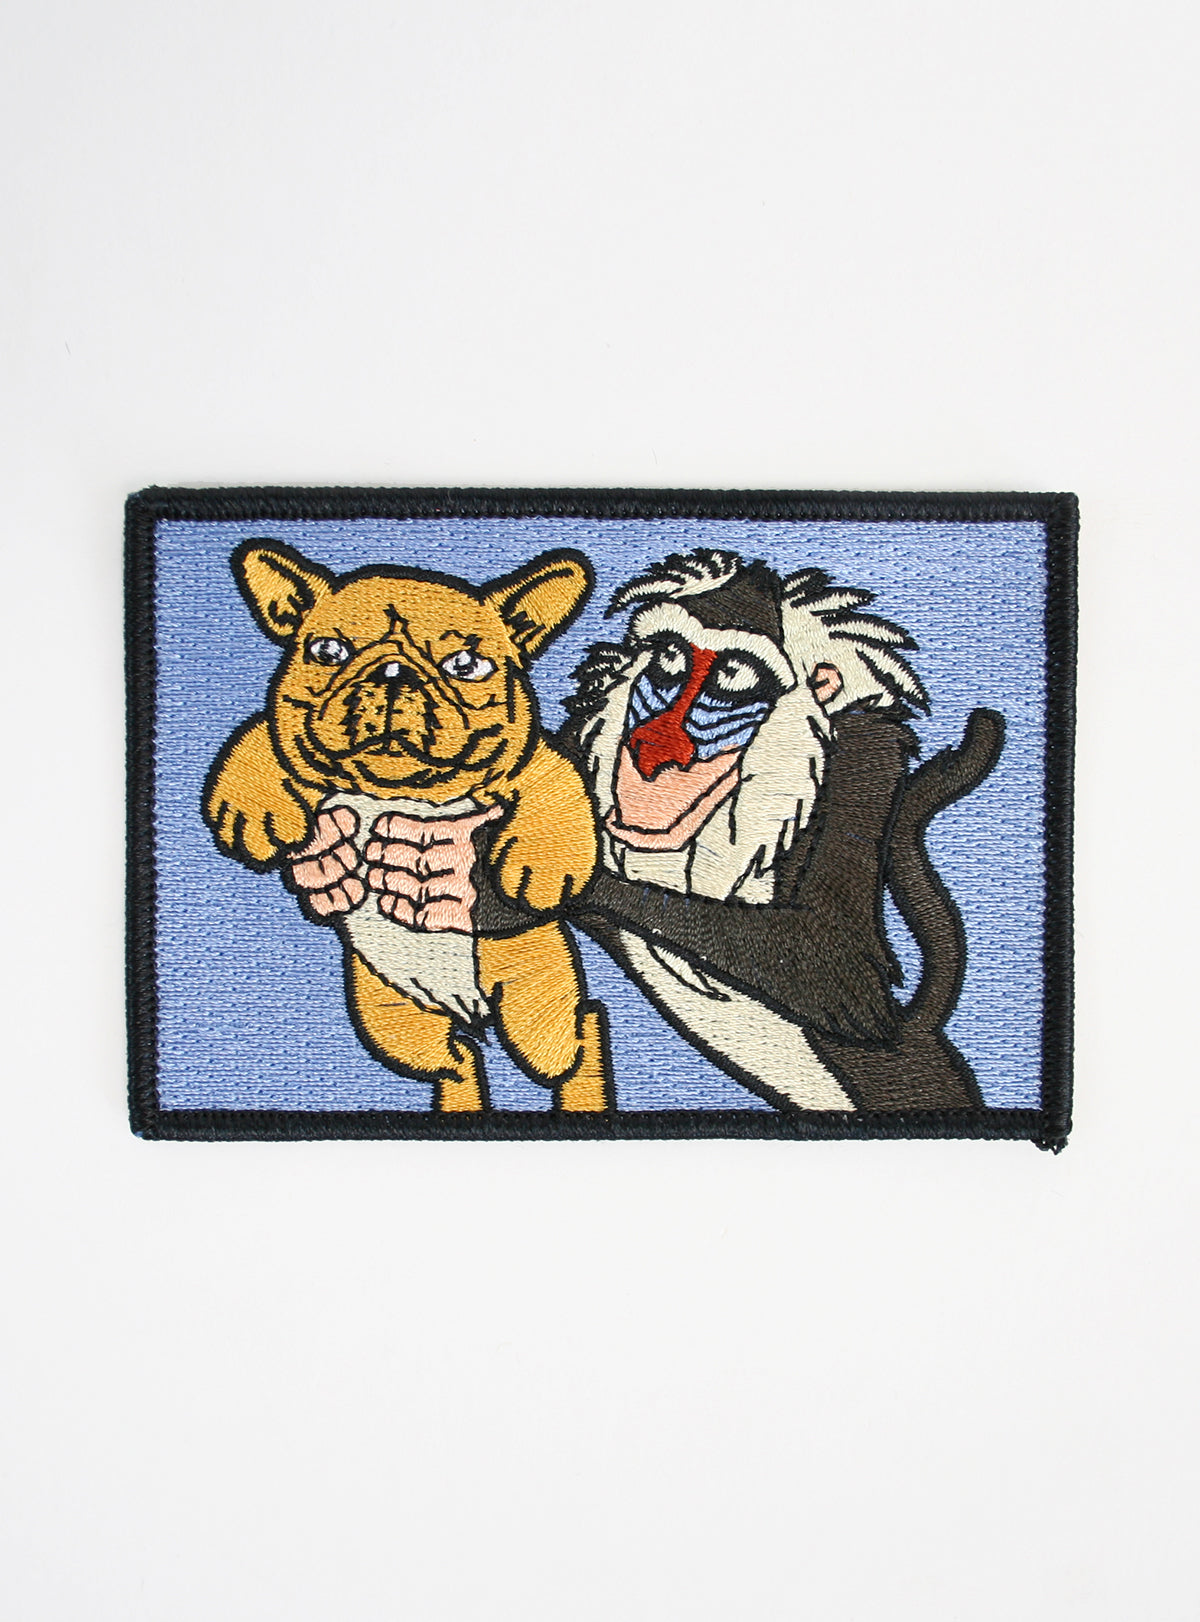 Lion King Patch